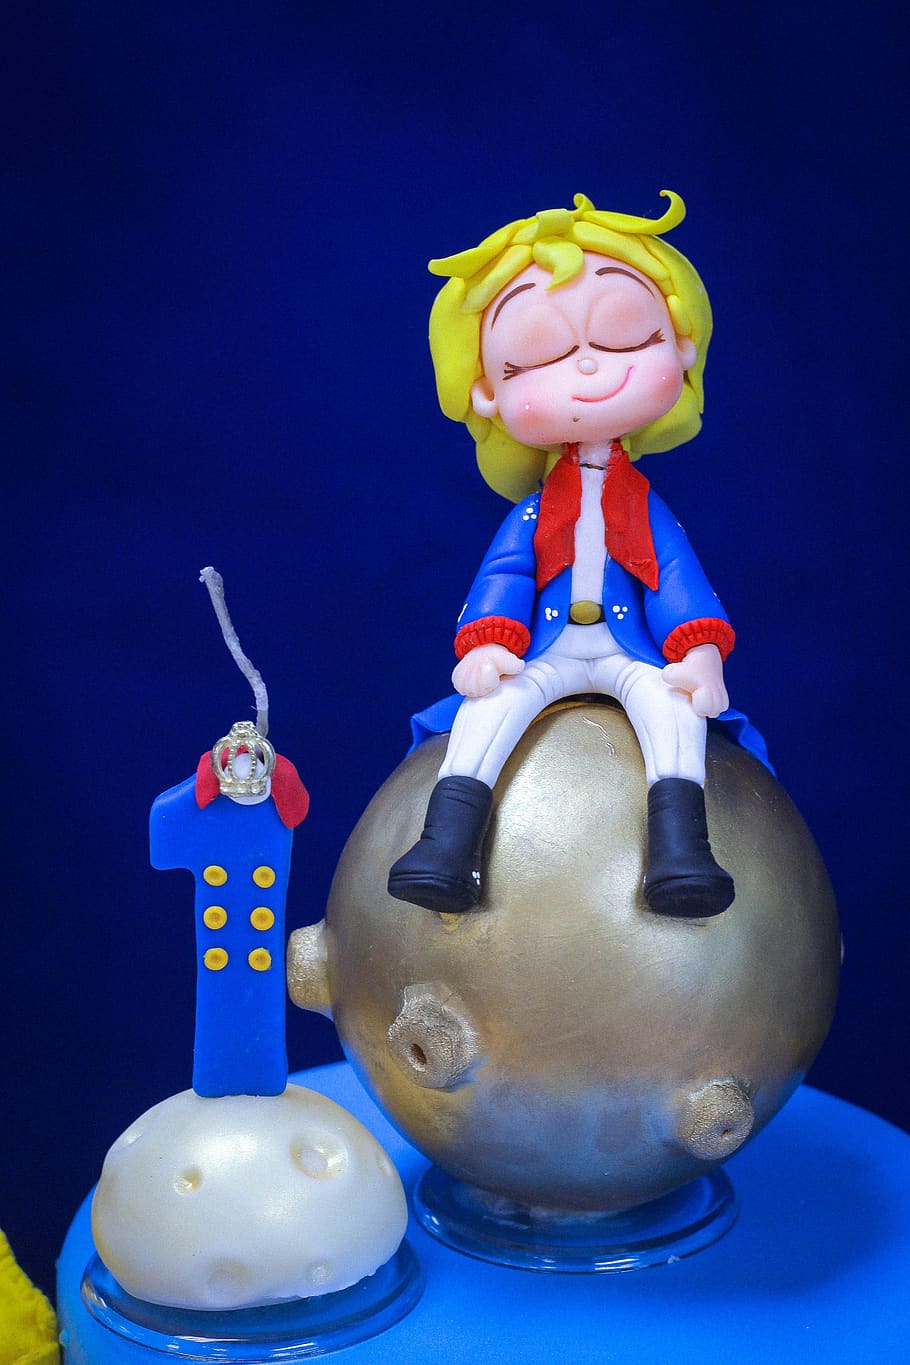 the little prince, cake, figurine, world, blue, one, one year, birthday, one year old birthday, baby